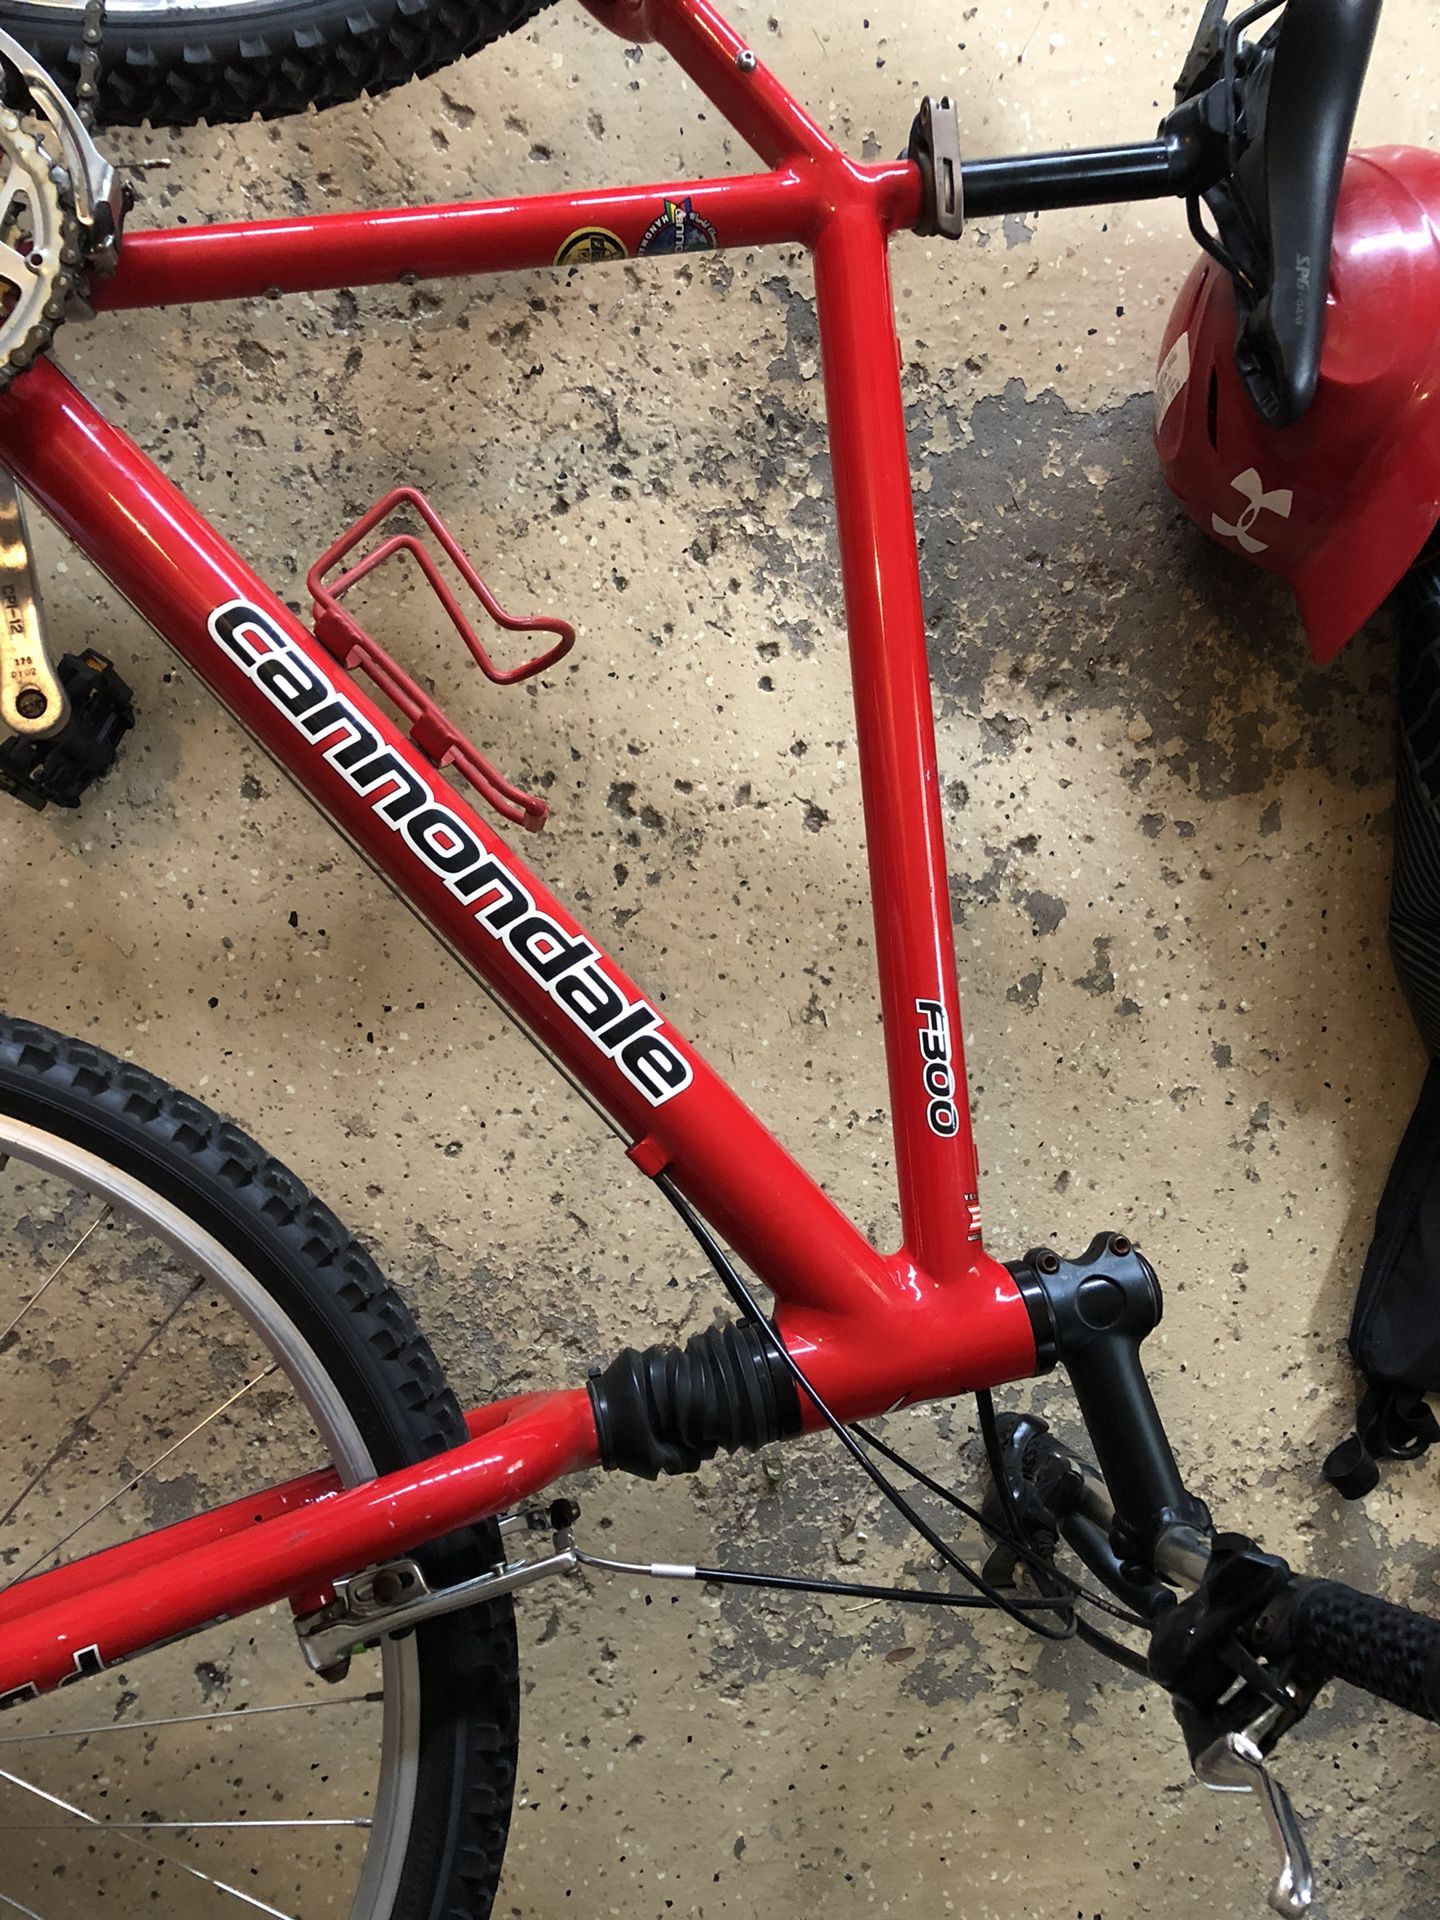 Vergissing Antibiotica Inhalen Used Cannondale mountain bike for Sale in Roselle, IL - OfferUp